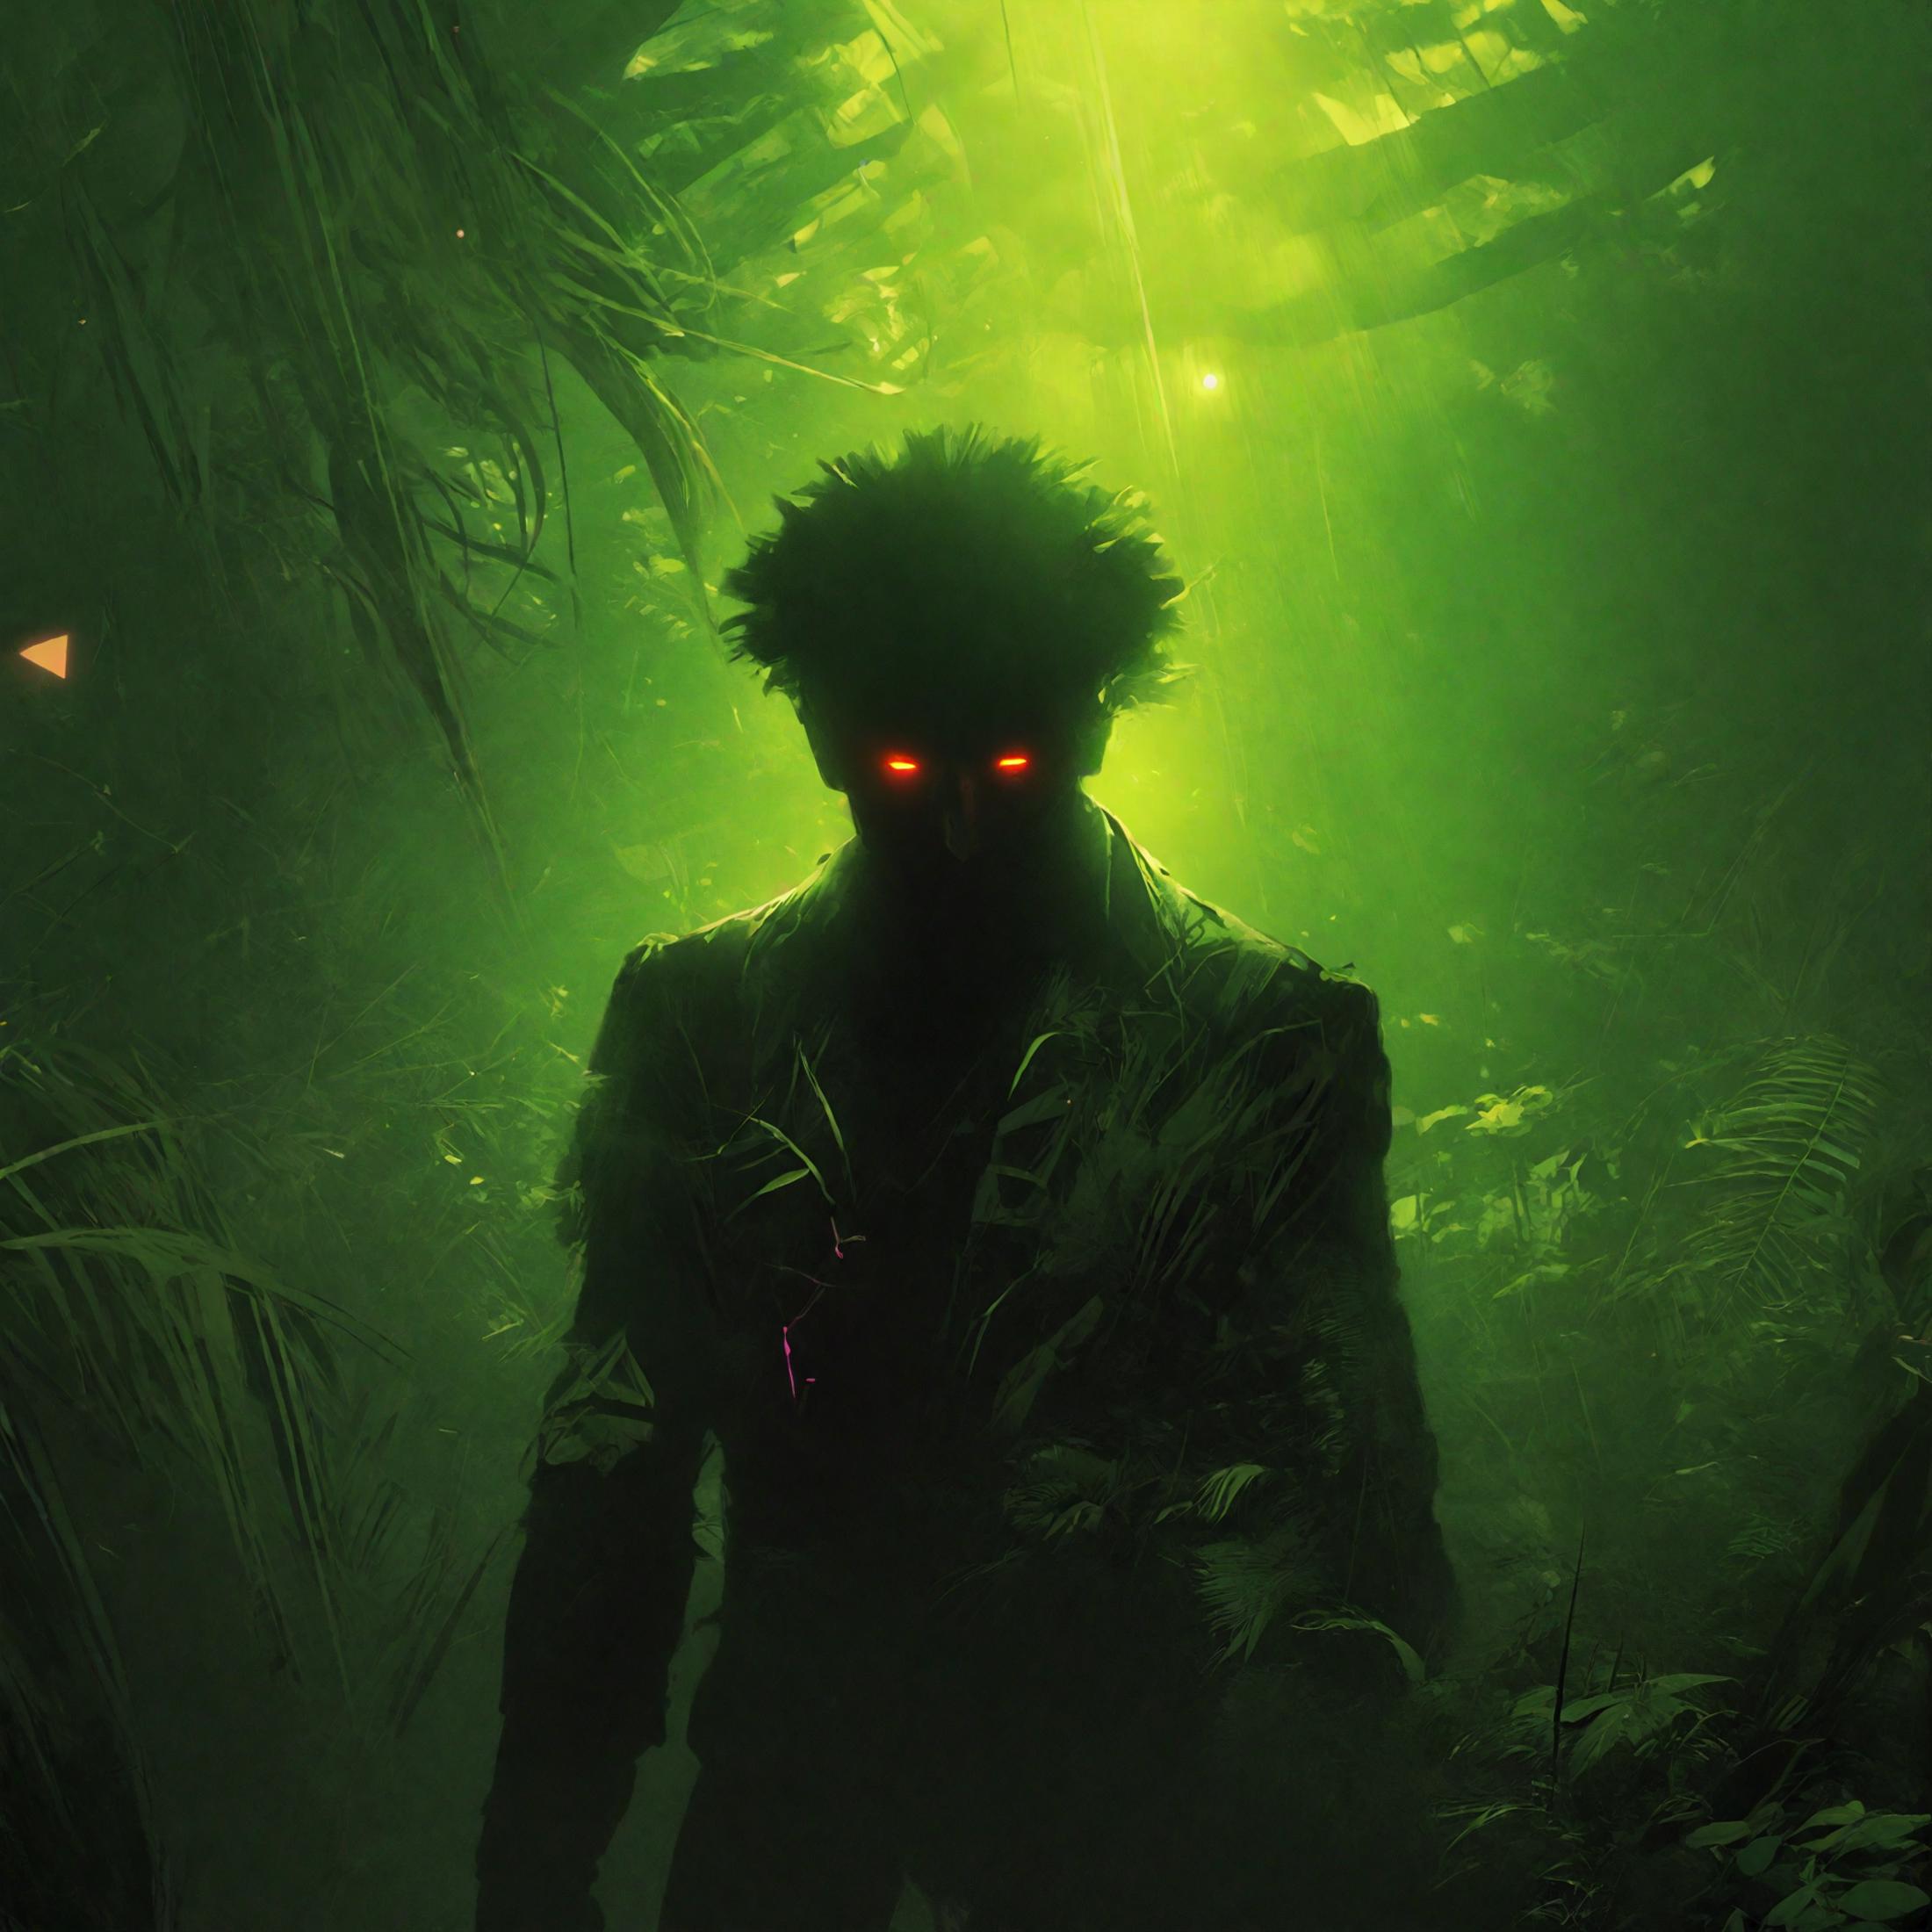 Green-lit scene of a man with glowing eyes.